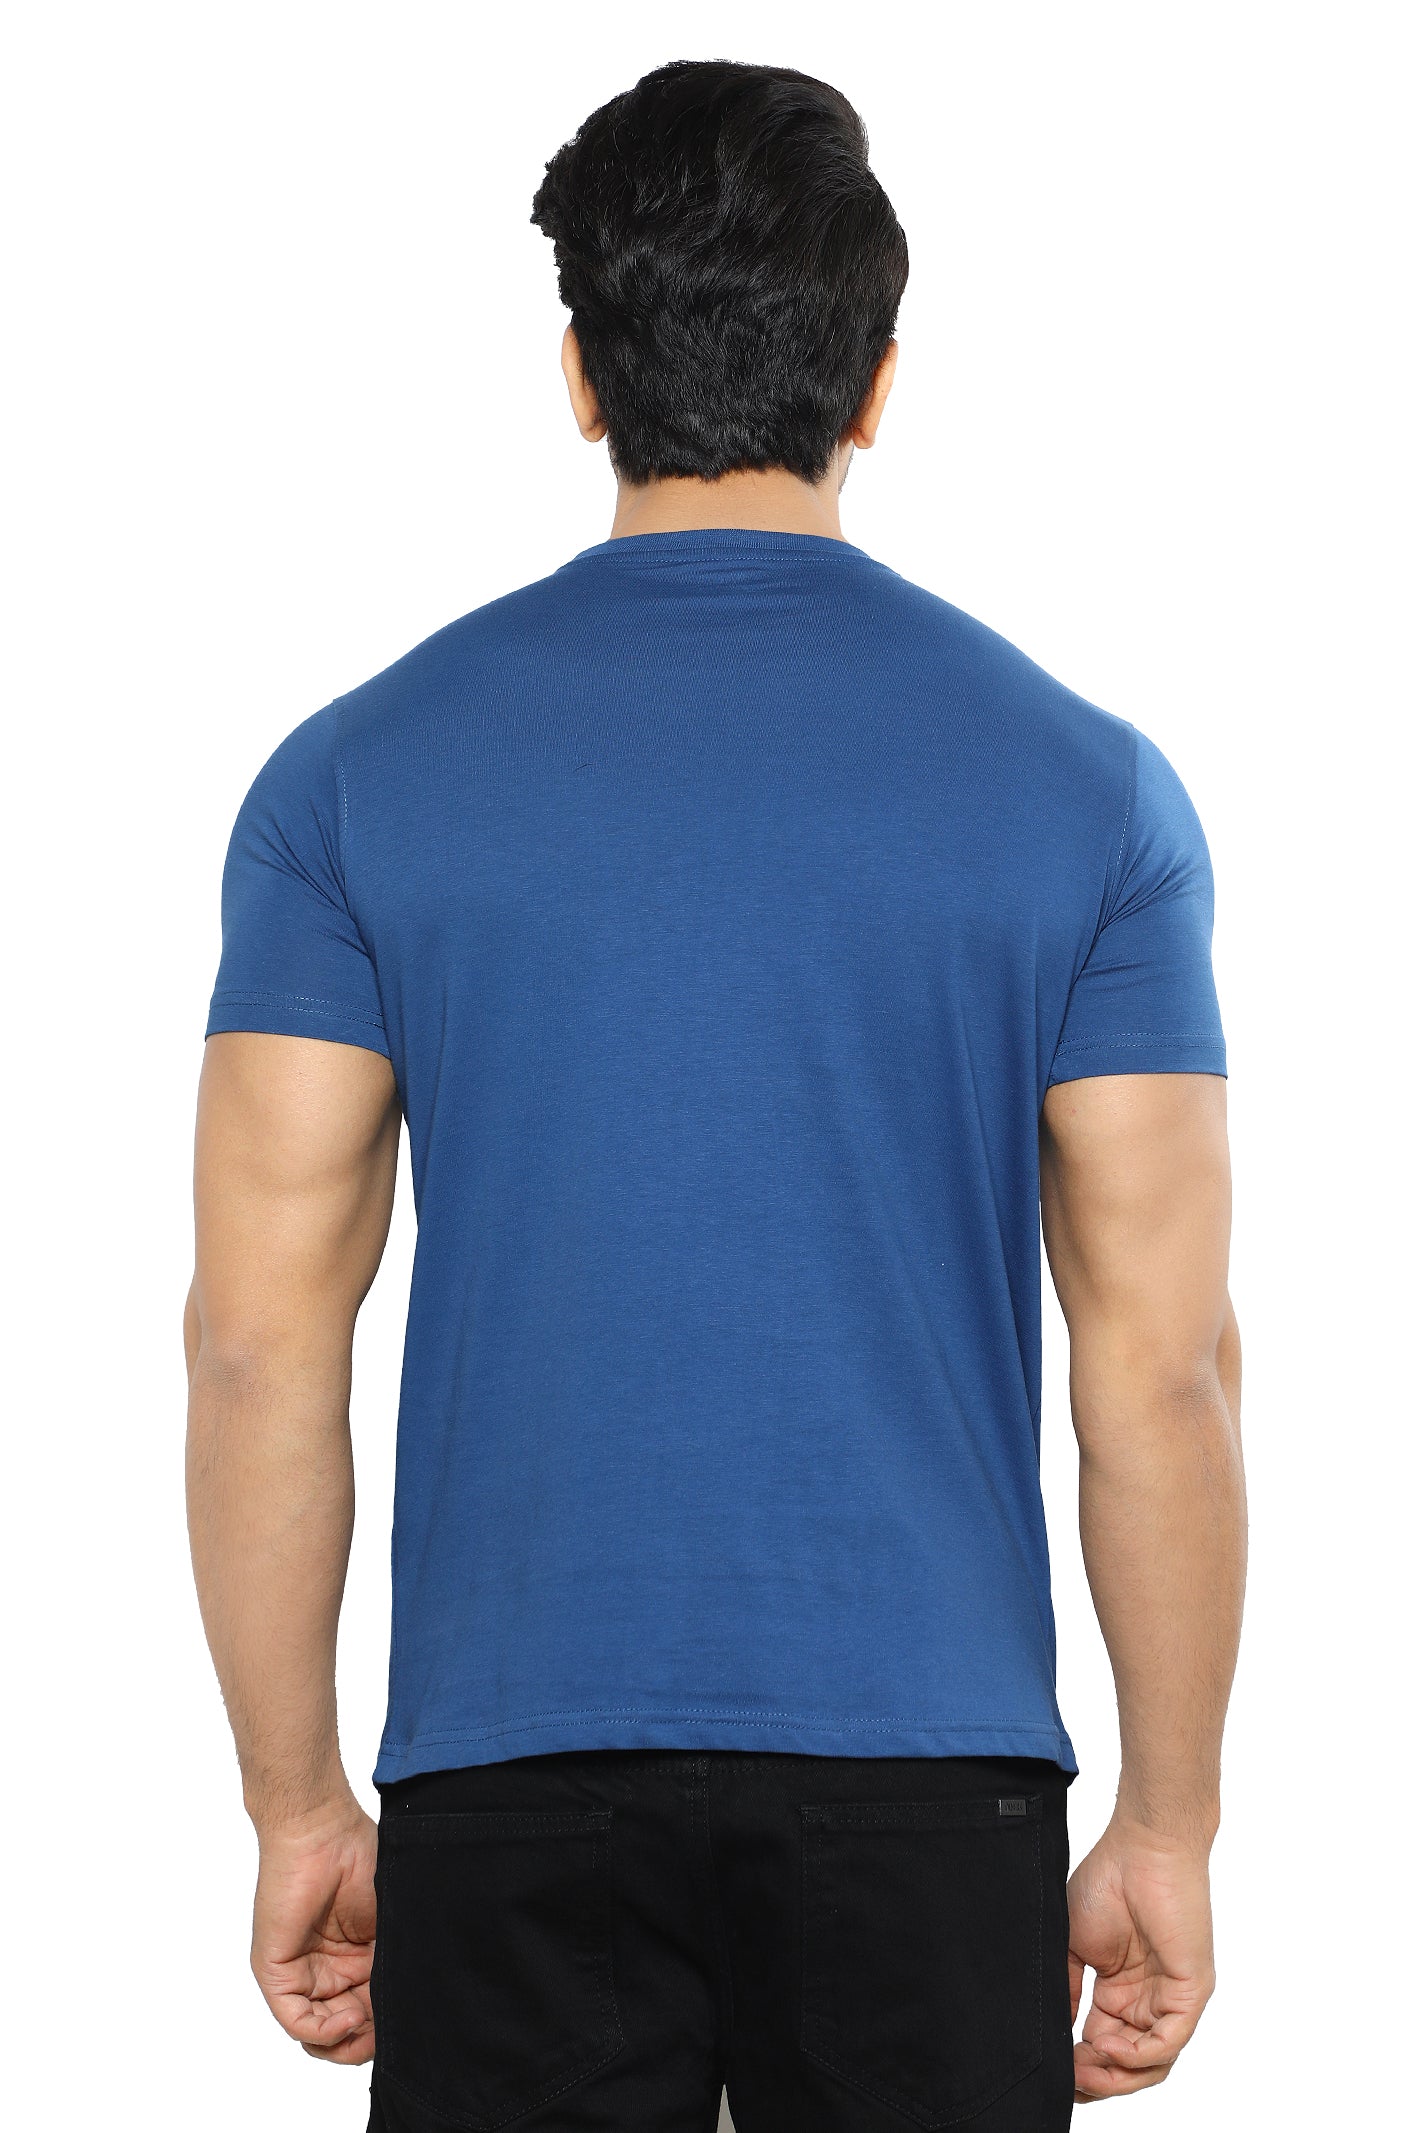 Diners Men's Round Neck T-Shirt SKU: NA856-N-BLUE - Diners